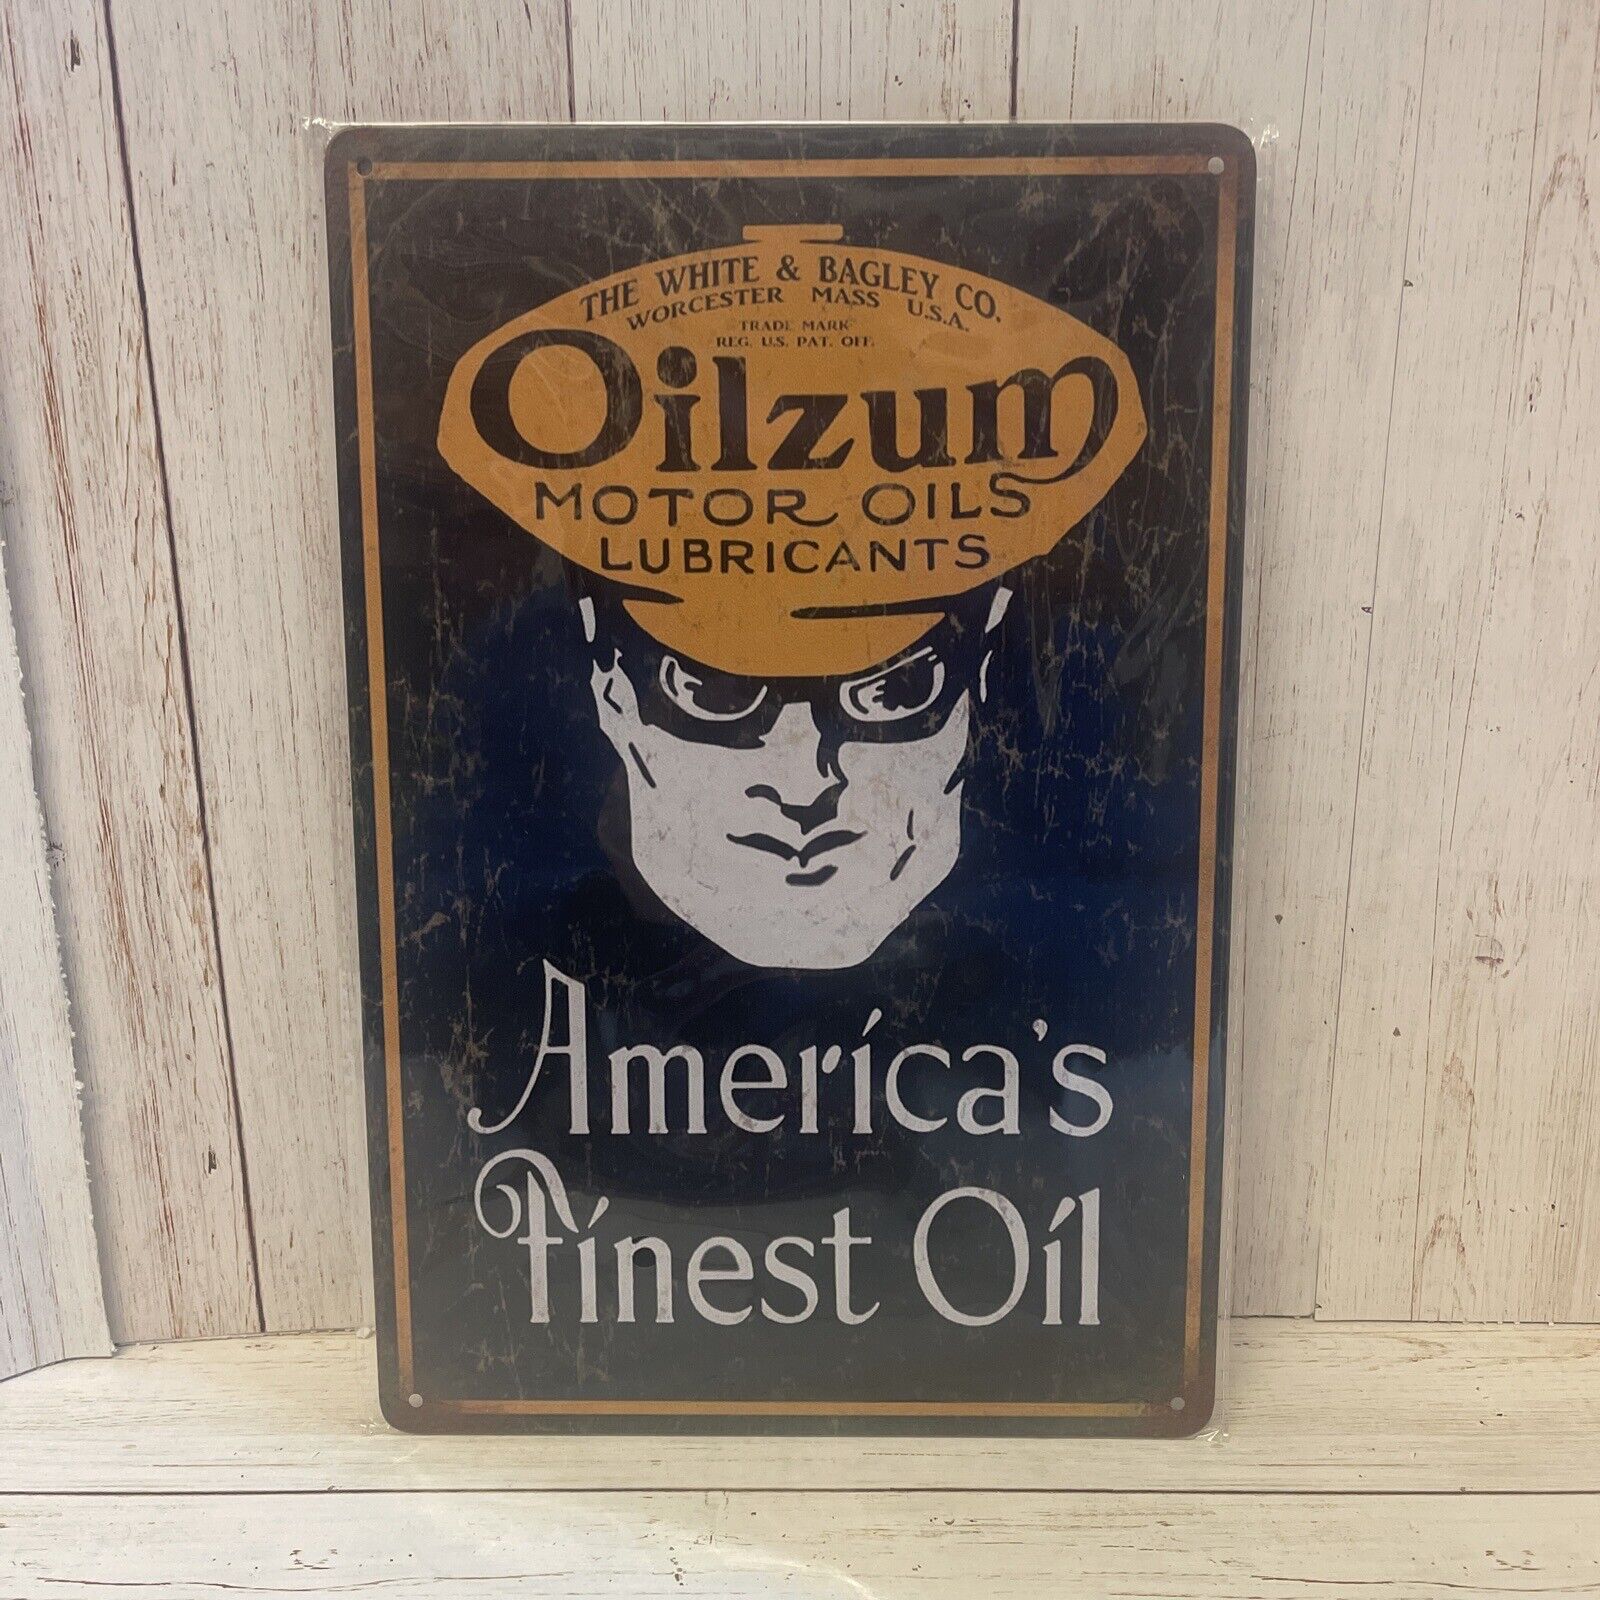 Oilzum Motorcycle Motor Oil Tin Metal Sign Gasoline Lubricants  Americans Finest